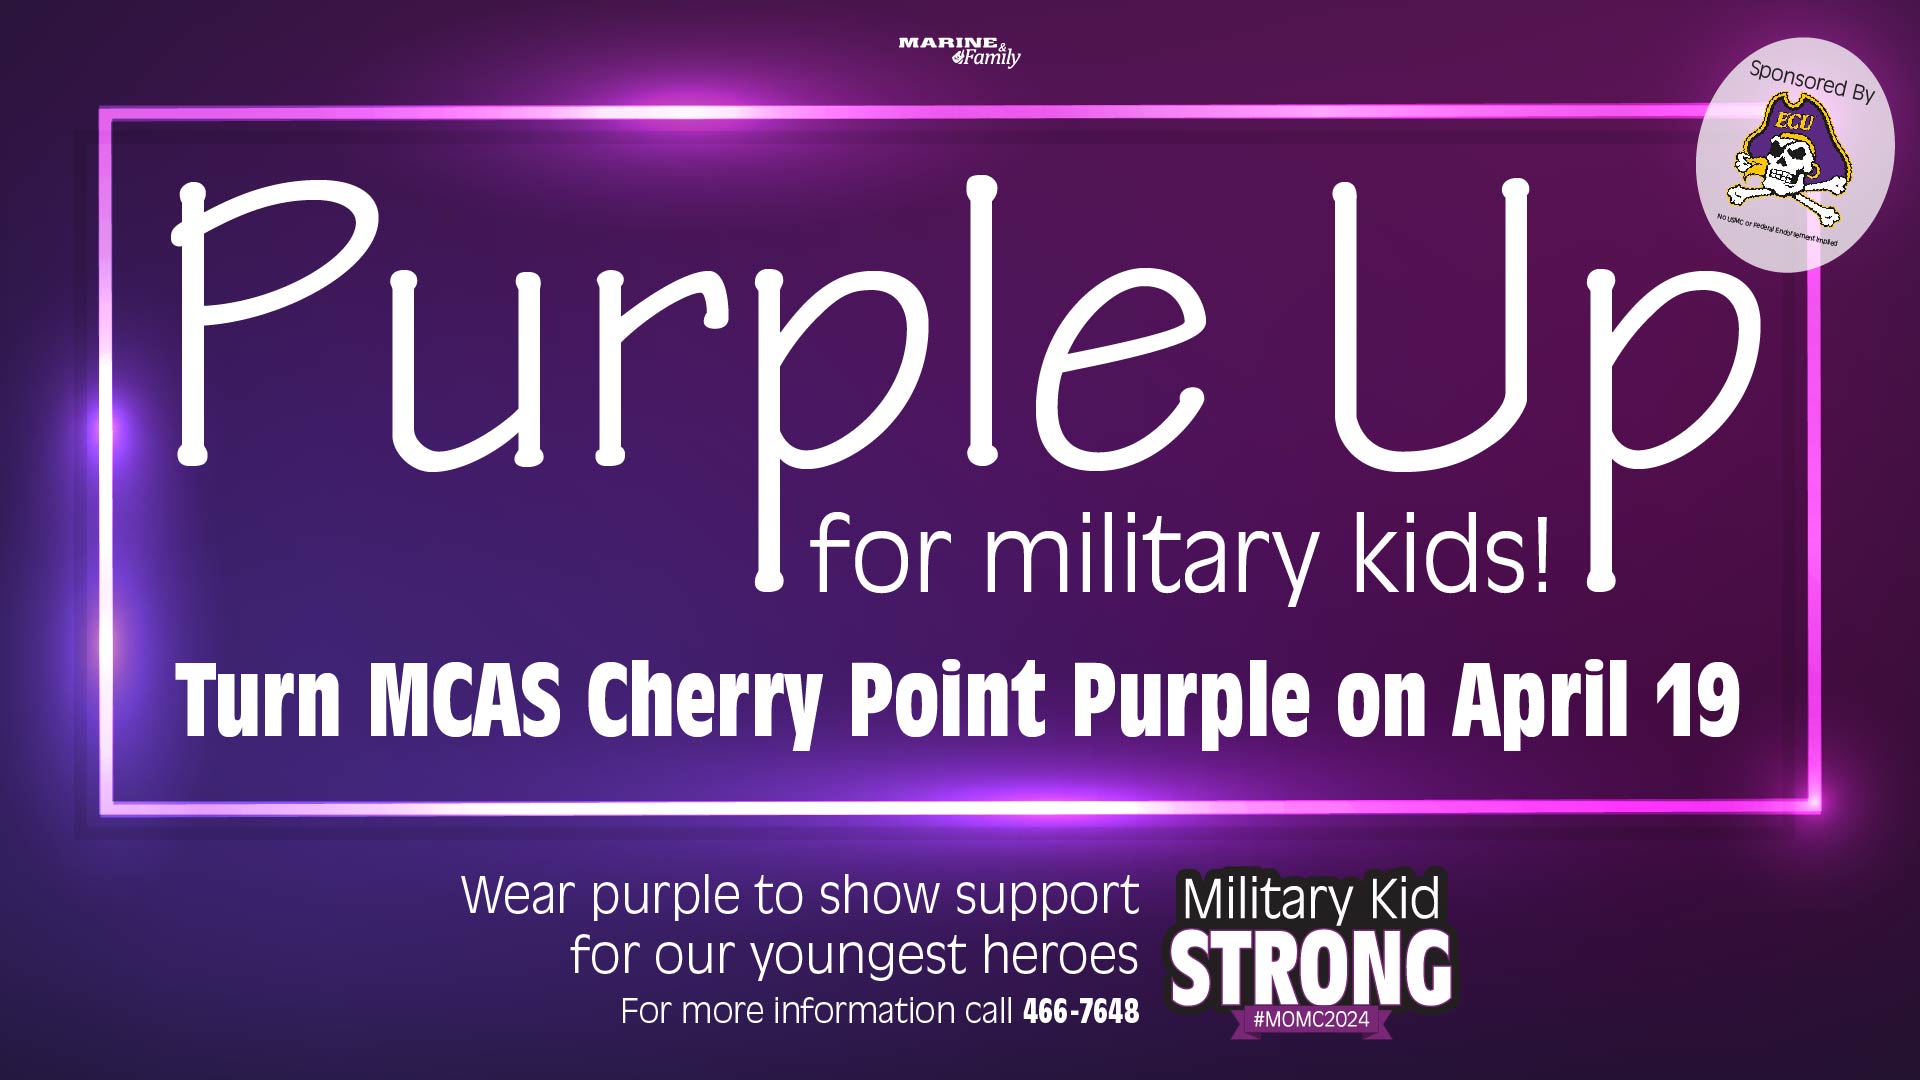 Purple Up for Military Kids